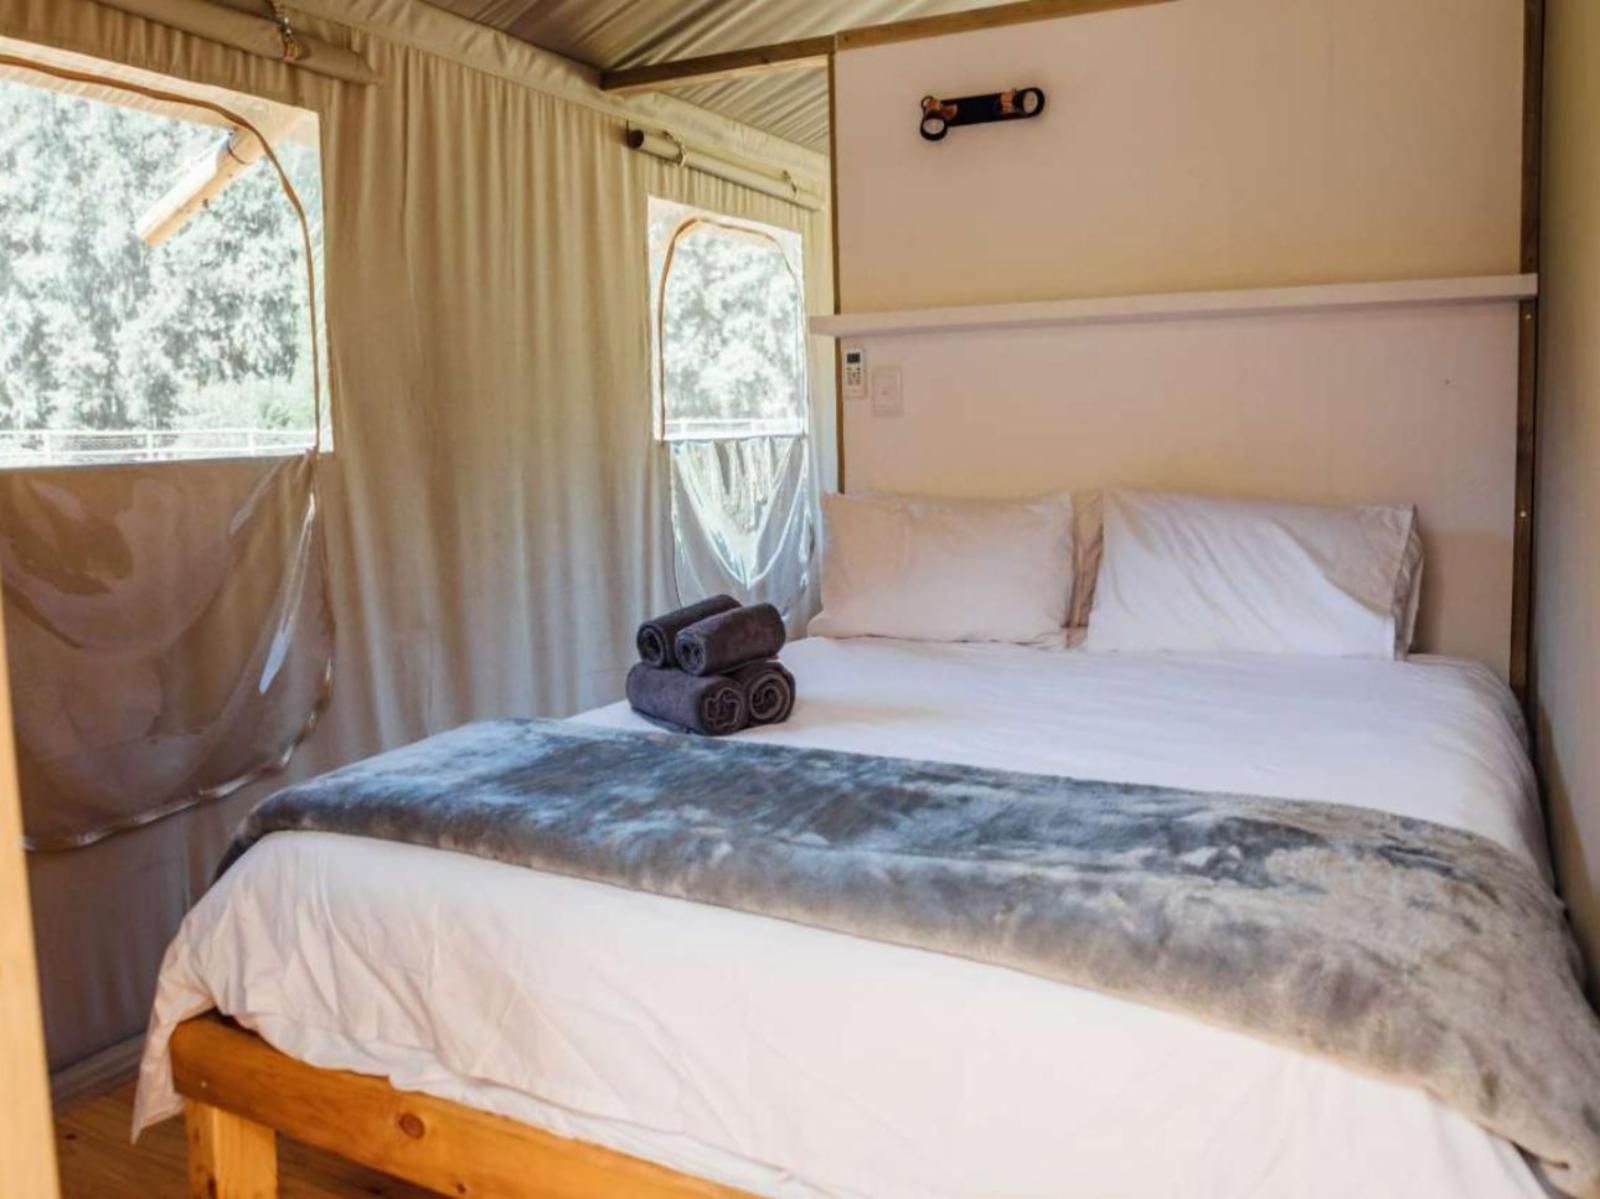 Africamps At Magoebaskloof Haenertsburg Limpopo Province South Africa Tent, Architecture, Bedroom